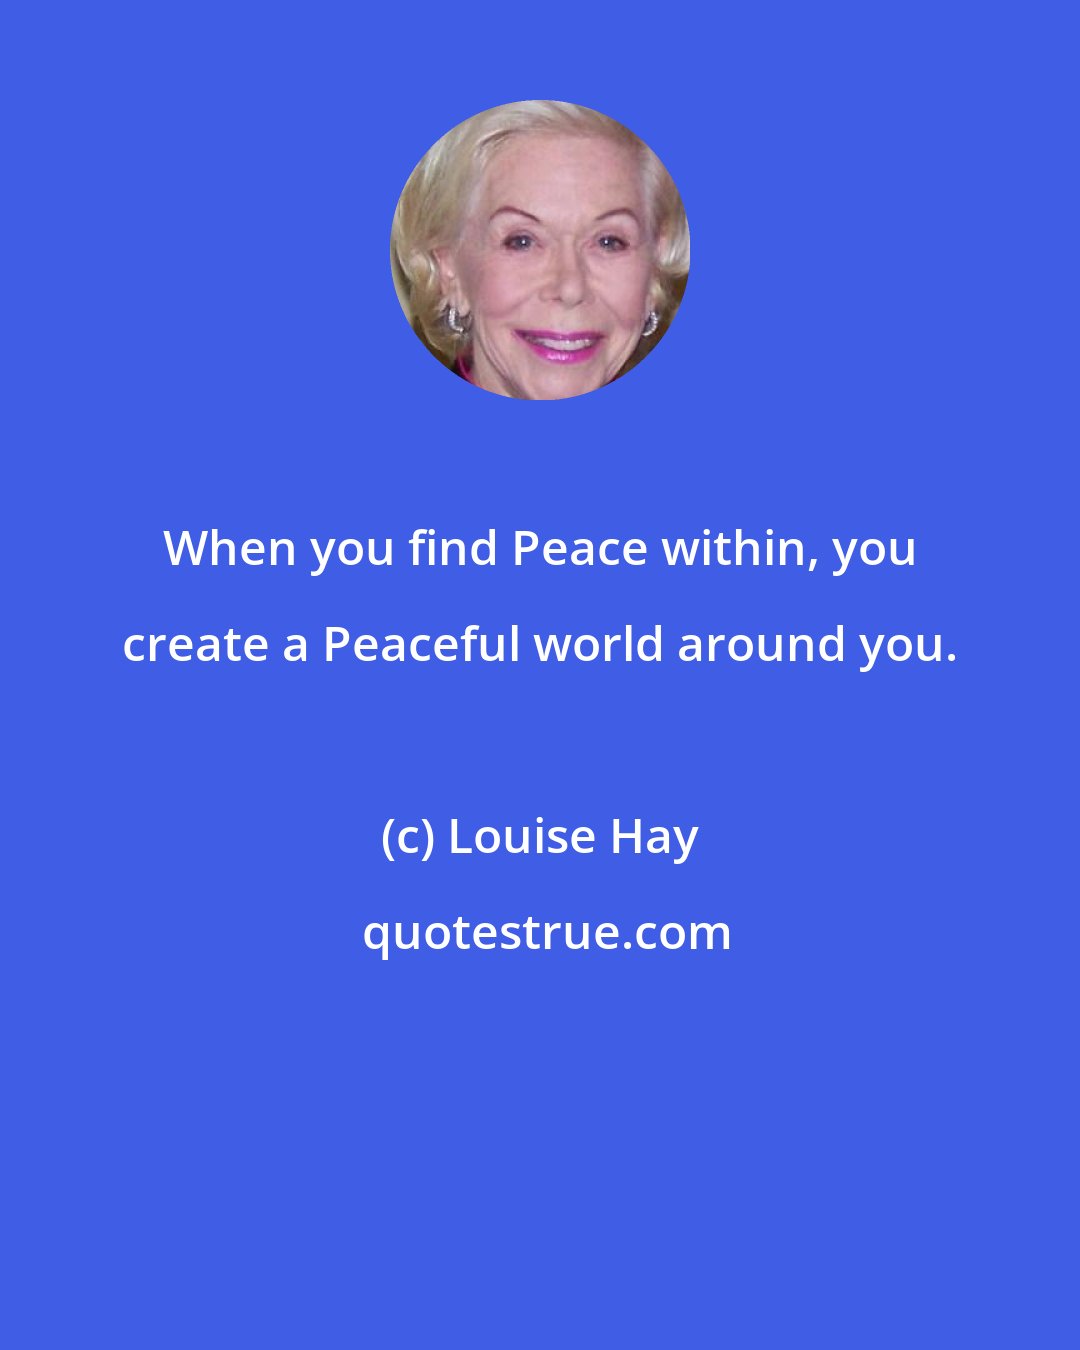 Louise Hay: When you find Peace within, you create a Peaceful world around you.